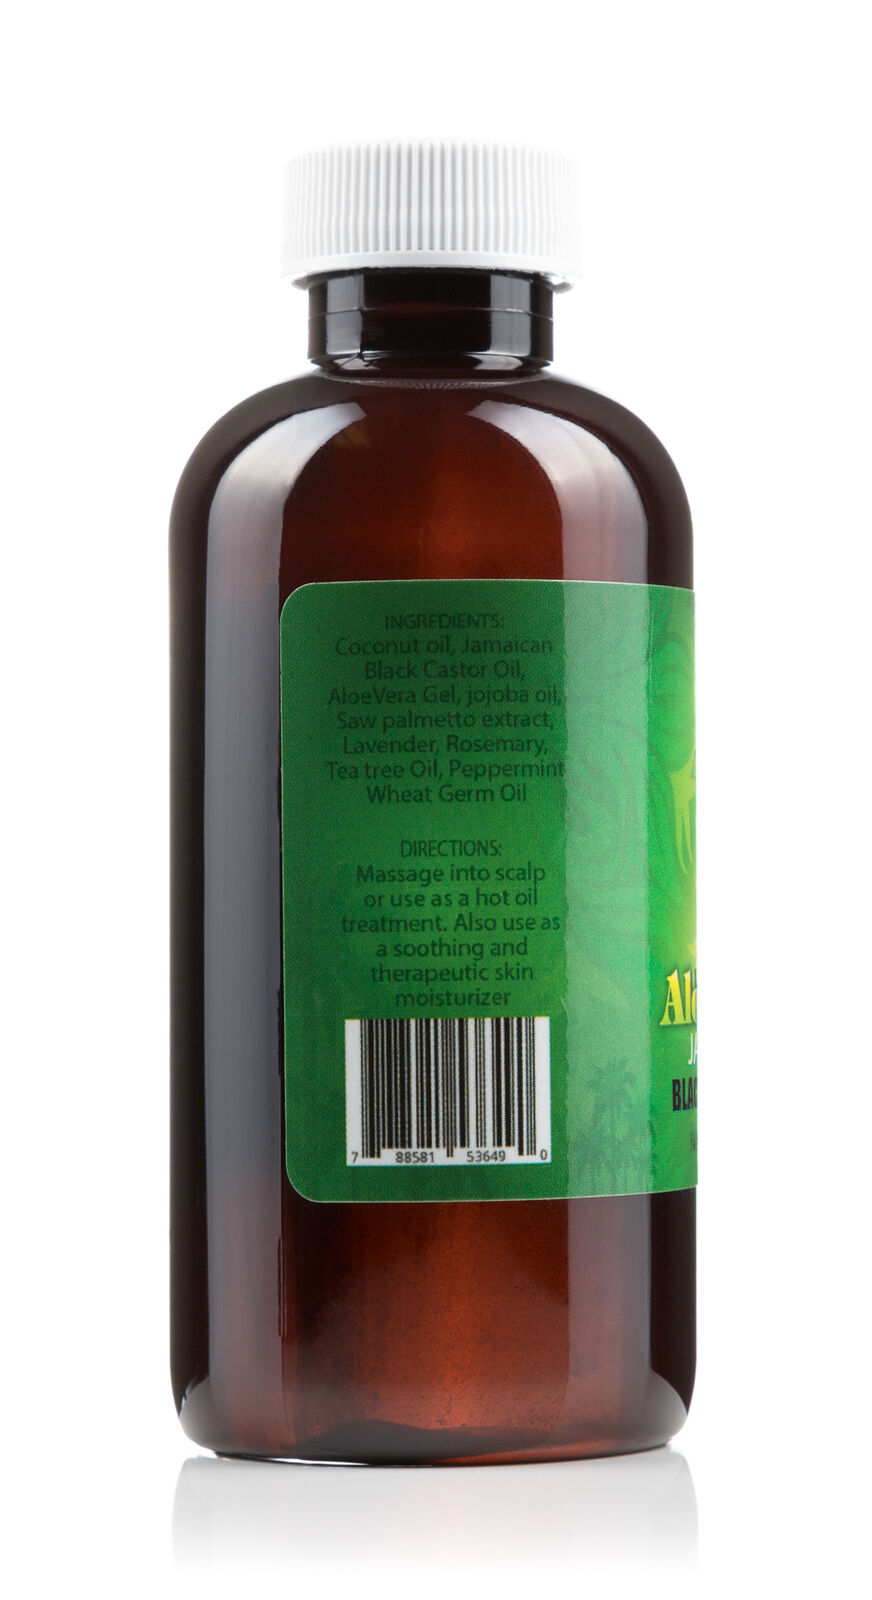 Tropic Isle Living Jamaican Black Castor Oil with Aloe Vera, 4 oz Find Your New Look Today!